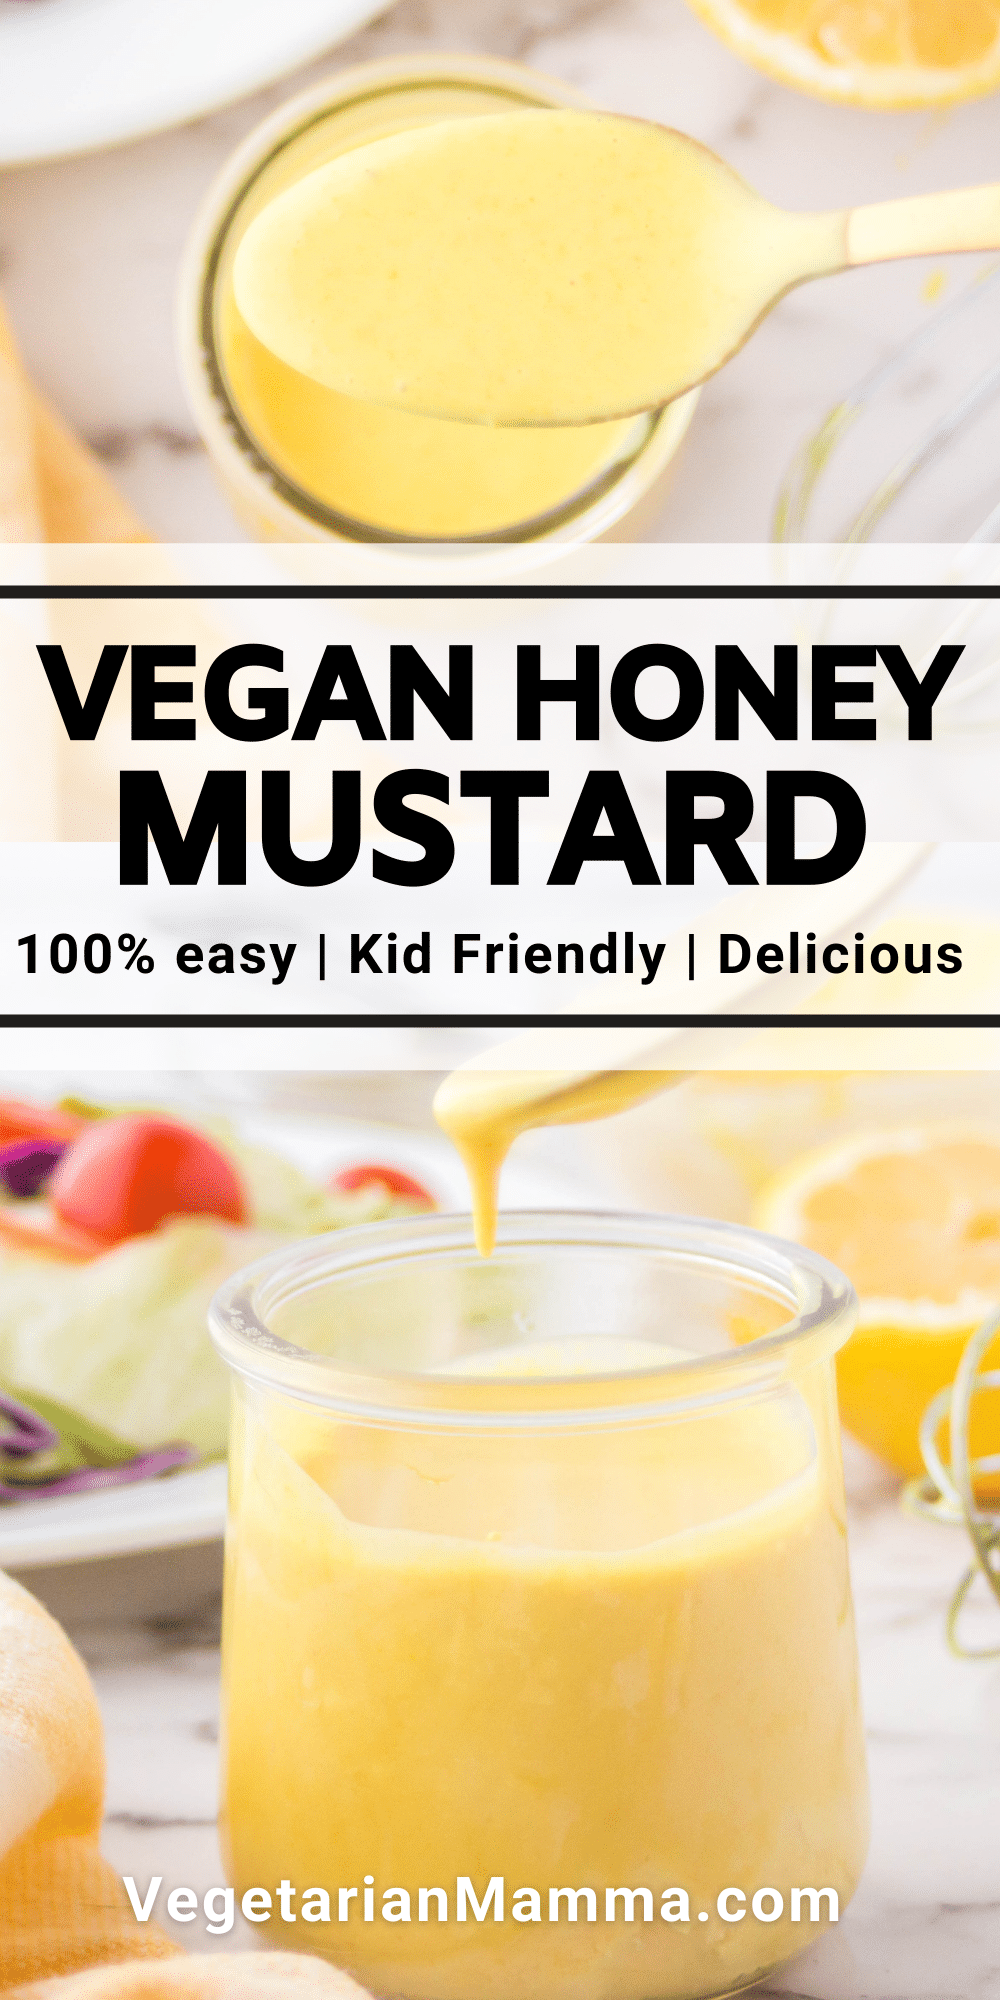 Vegan honey mustard sauce is the delicious dip that goes with anything! Enjoy dipping your favorite foods into this sweet and tangy sauce. #vegan #honeymustard